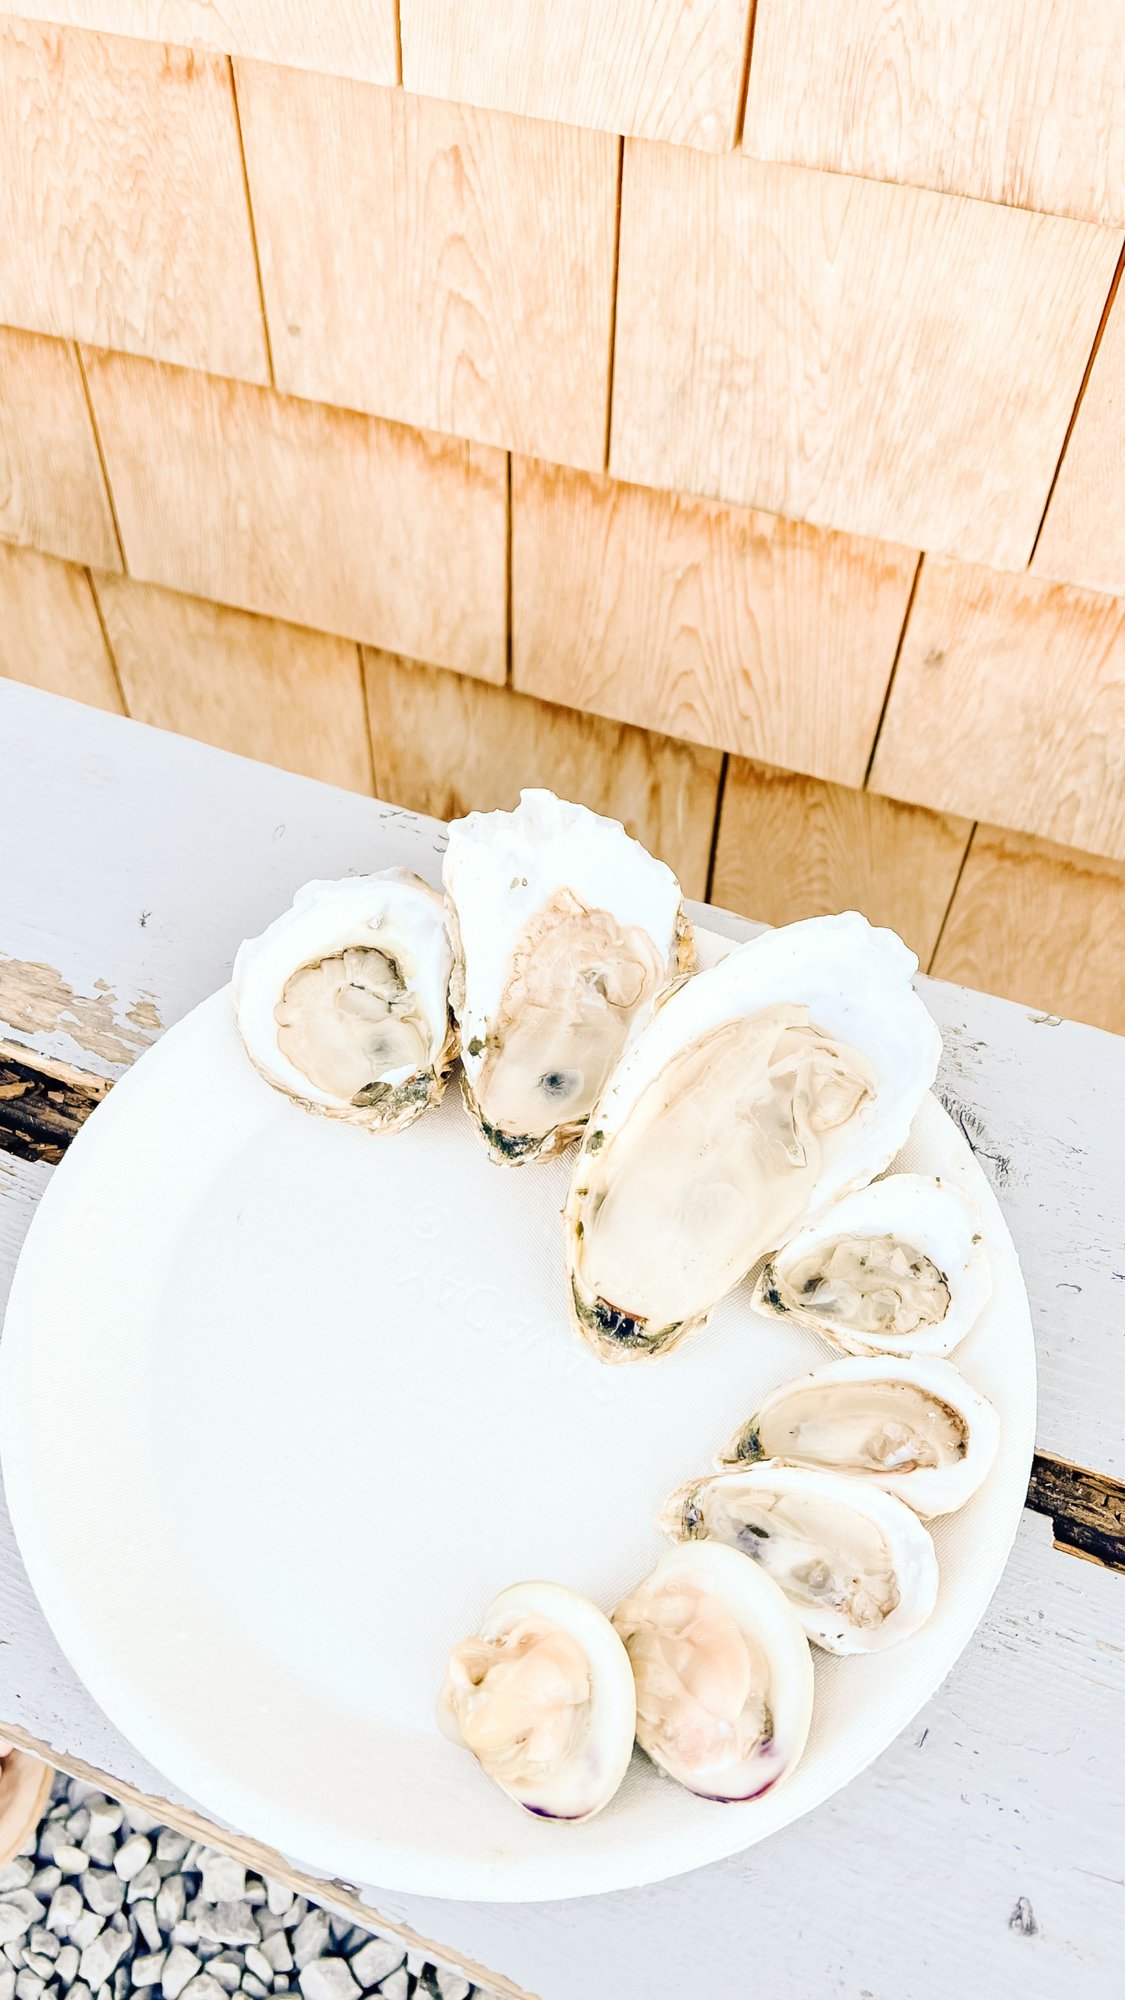 Raw oysters on a white place with a shingled building in the background